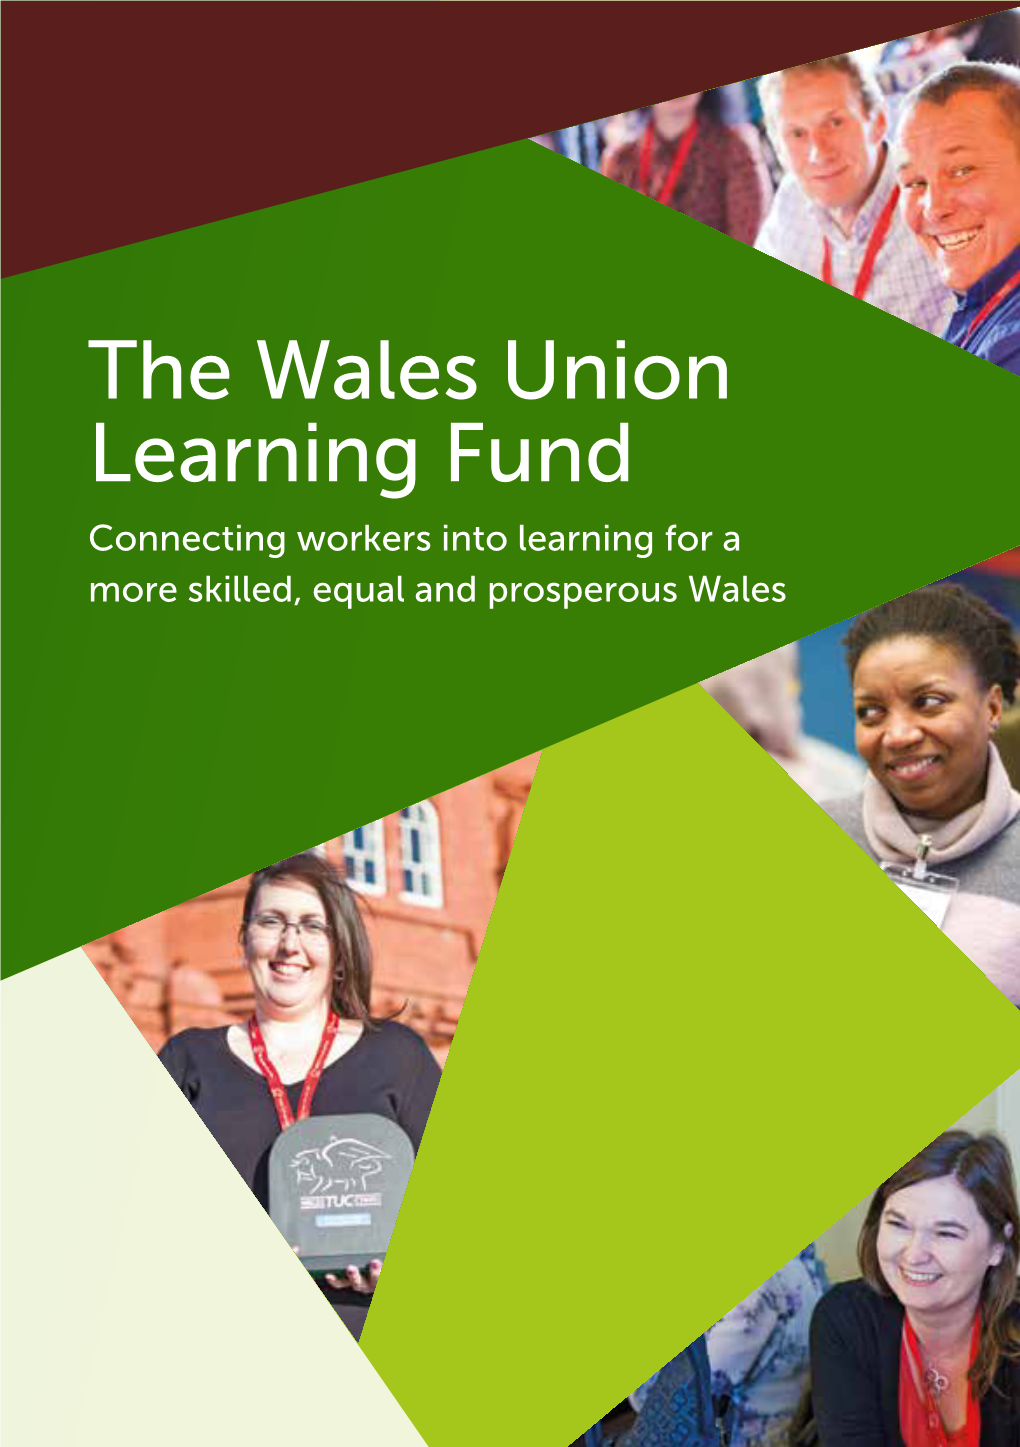 The Wales Union Learning Fund Connecting Workers Into Learning for a More Skilled, Equal and Prosperous Wales 2 the Wales Union Learning Fund